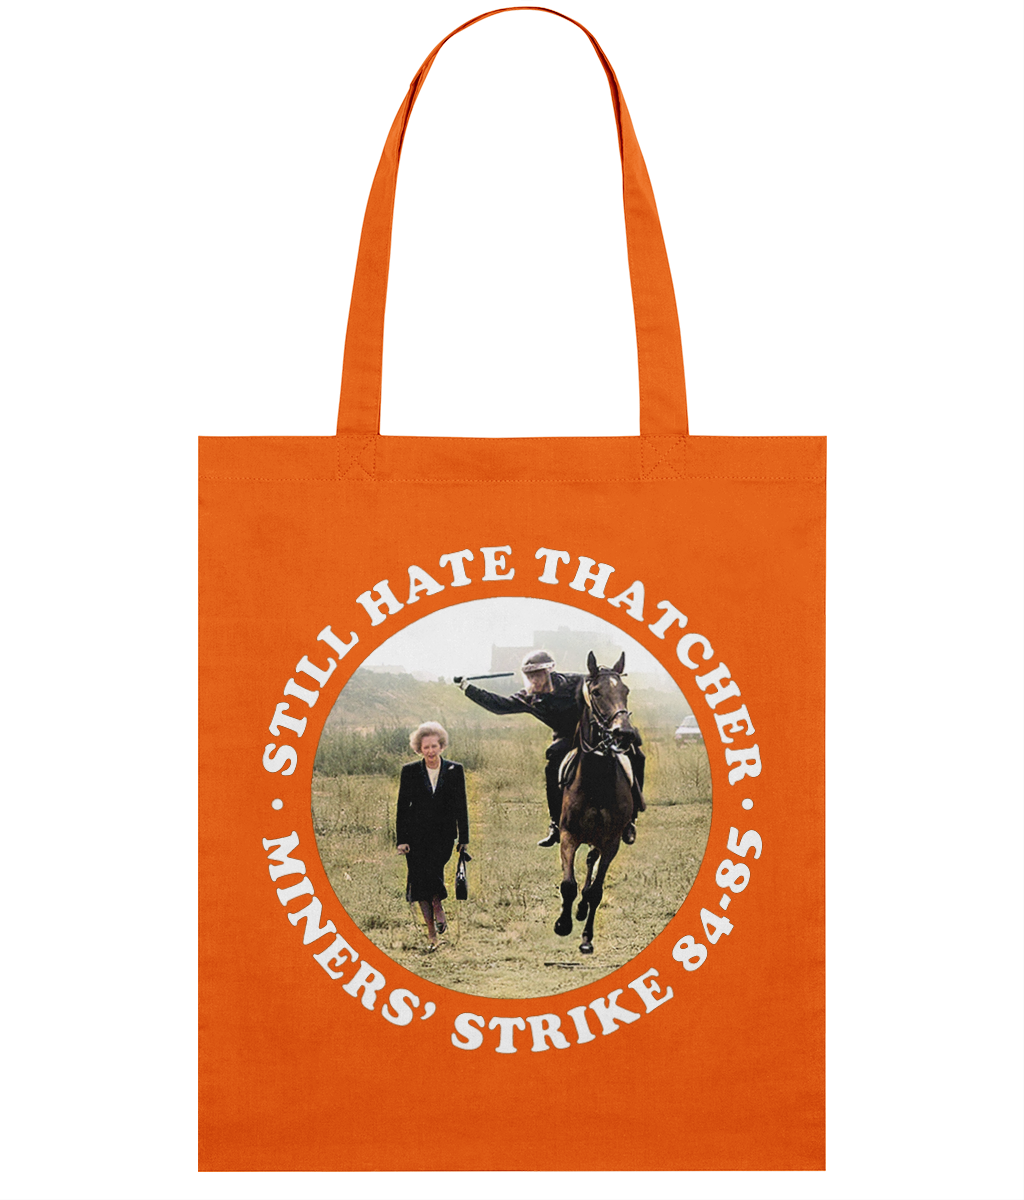 Still Hate Thatcher - Roundel - White Text - Tote Bag